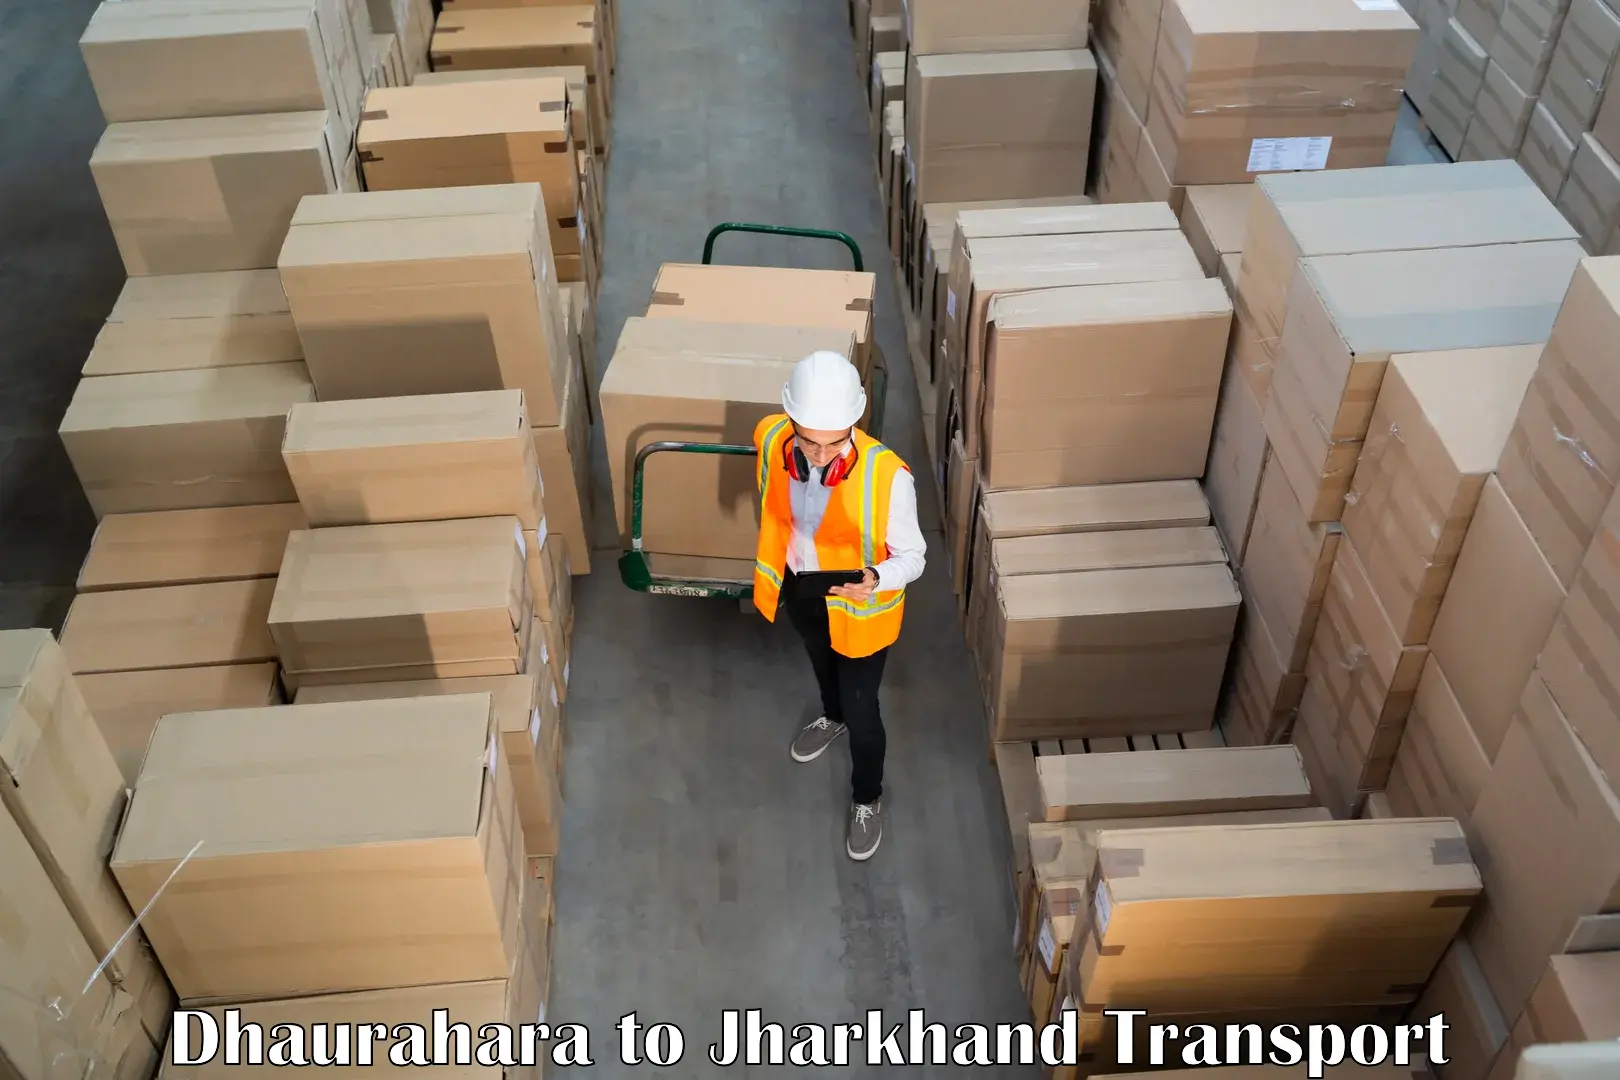 Truck transport companies in India Dhaurahara to Chouparan